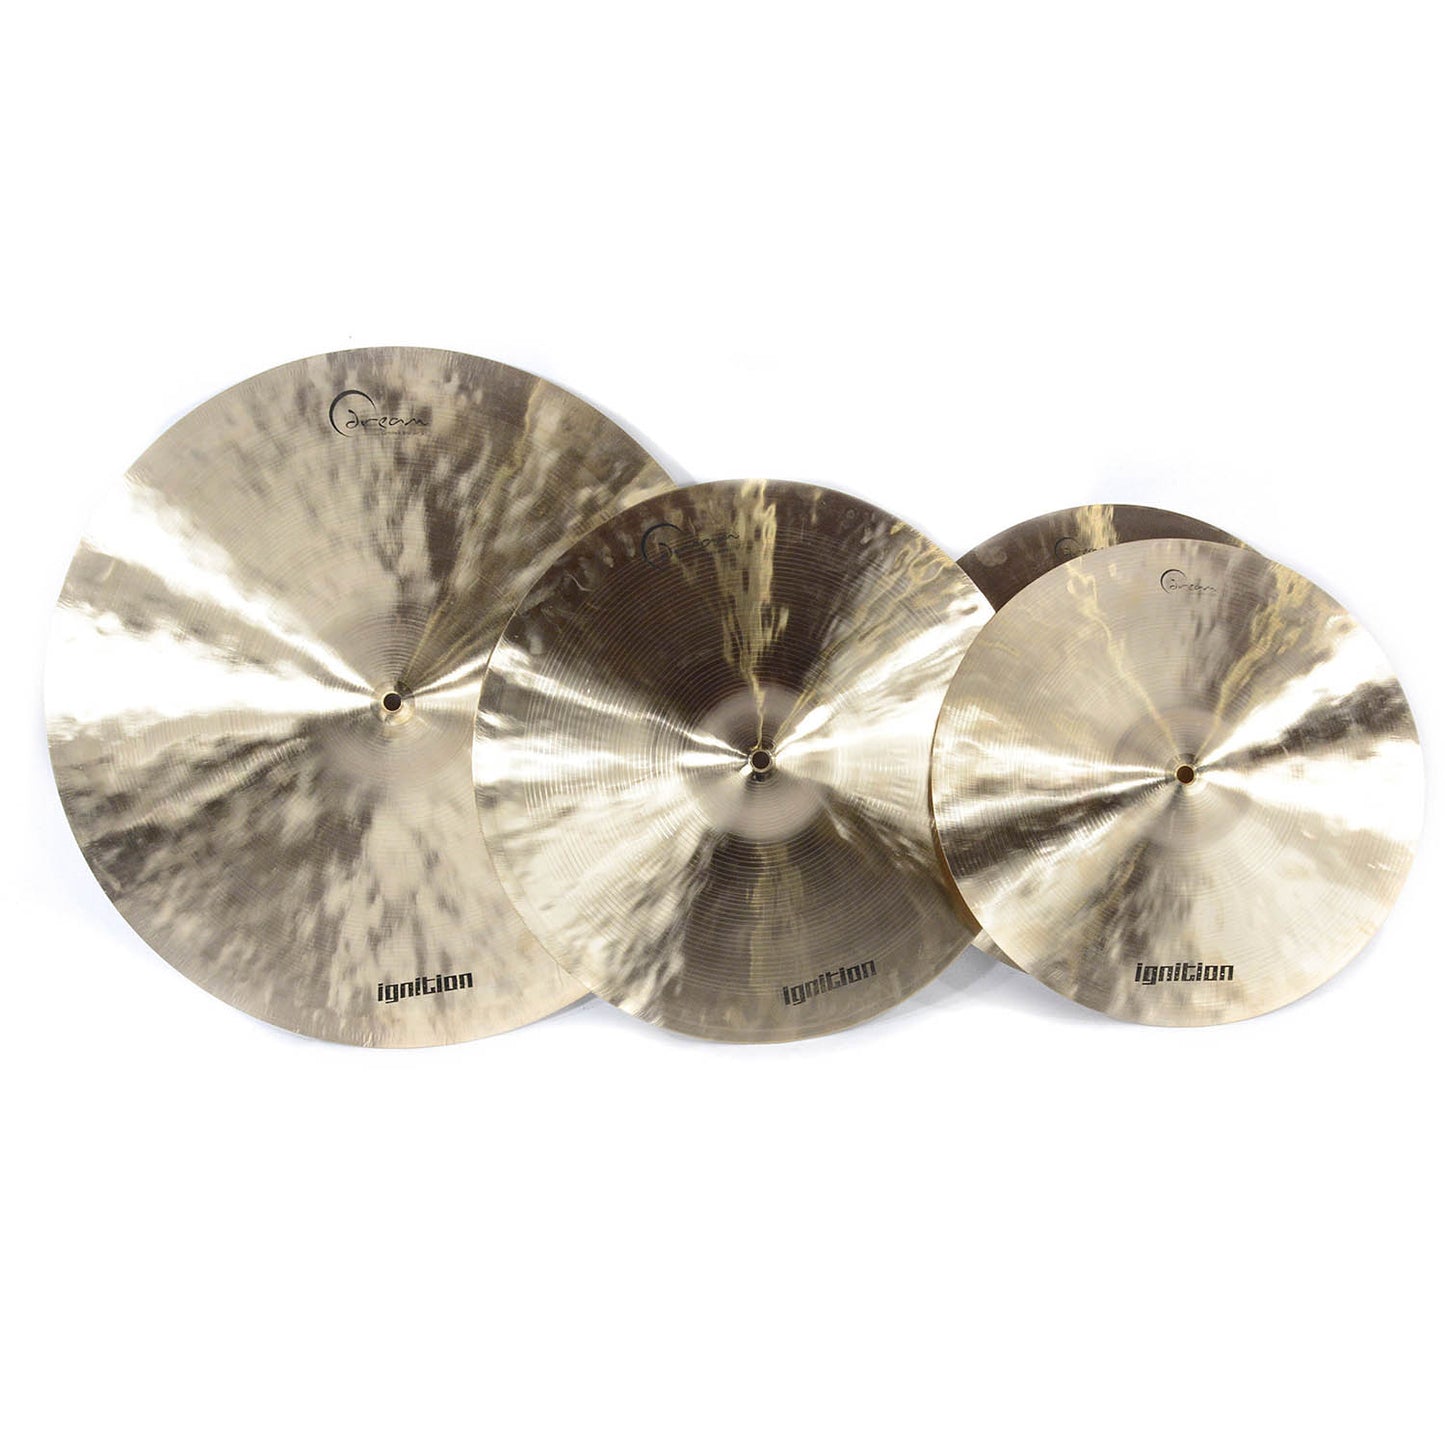 Dream Cymbals Ignition 3 Piece Cymbal Pack